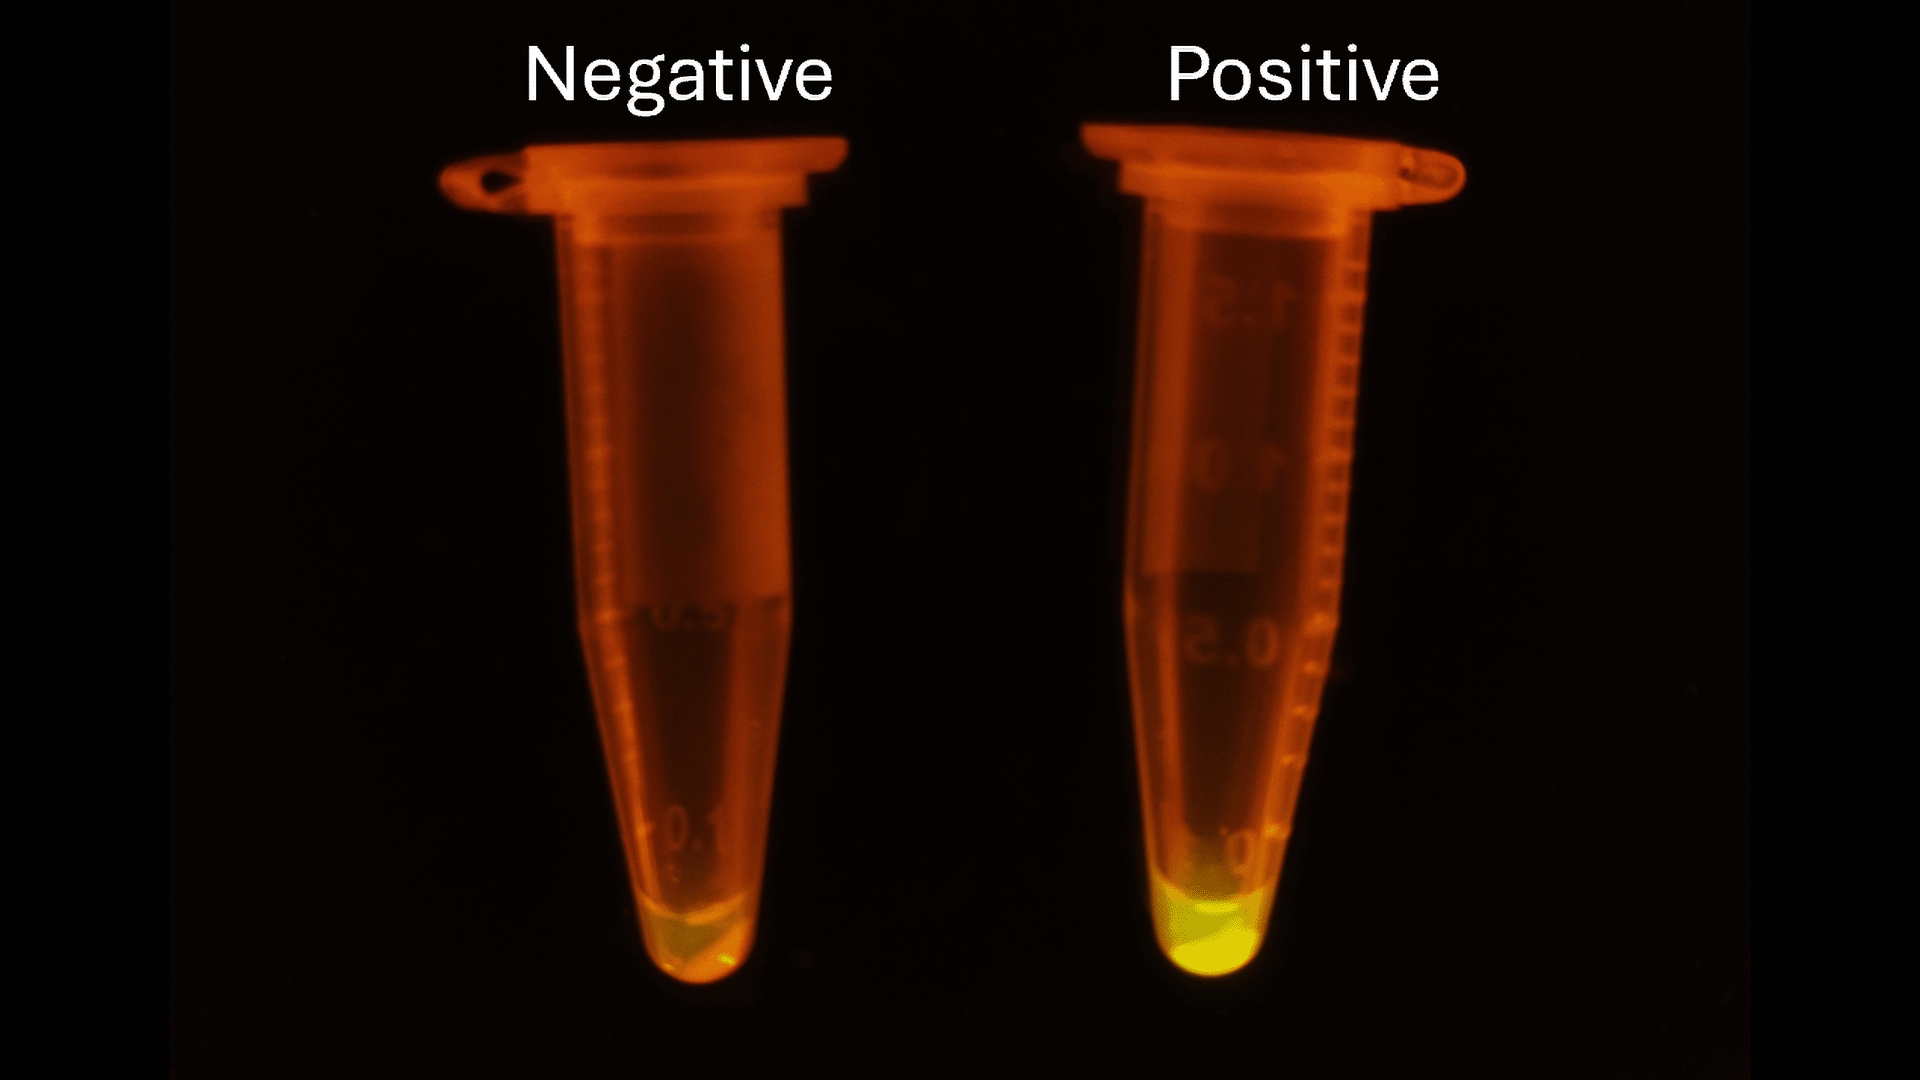 The biosensors emit a fluorescent signal when they detect flavonoids, making it easy to visually identify which microorganisms are producing high amounts of the compound.